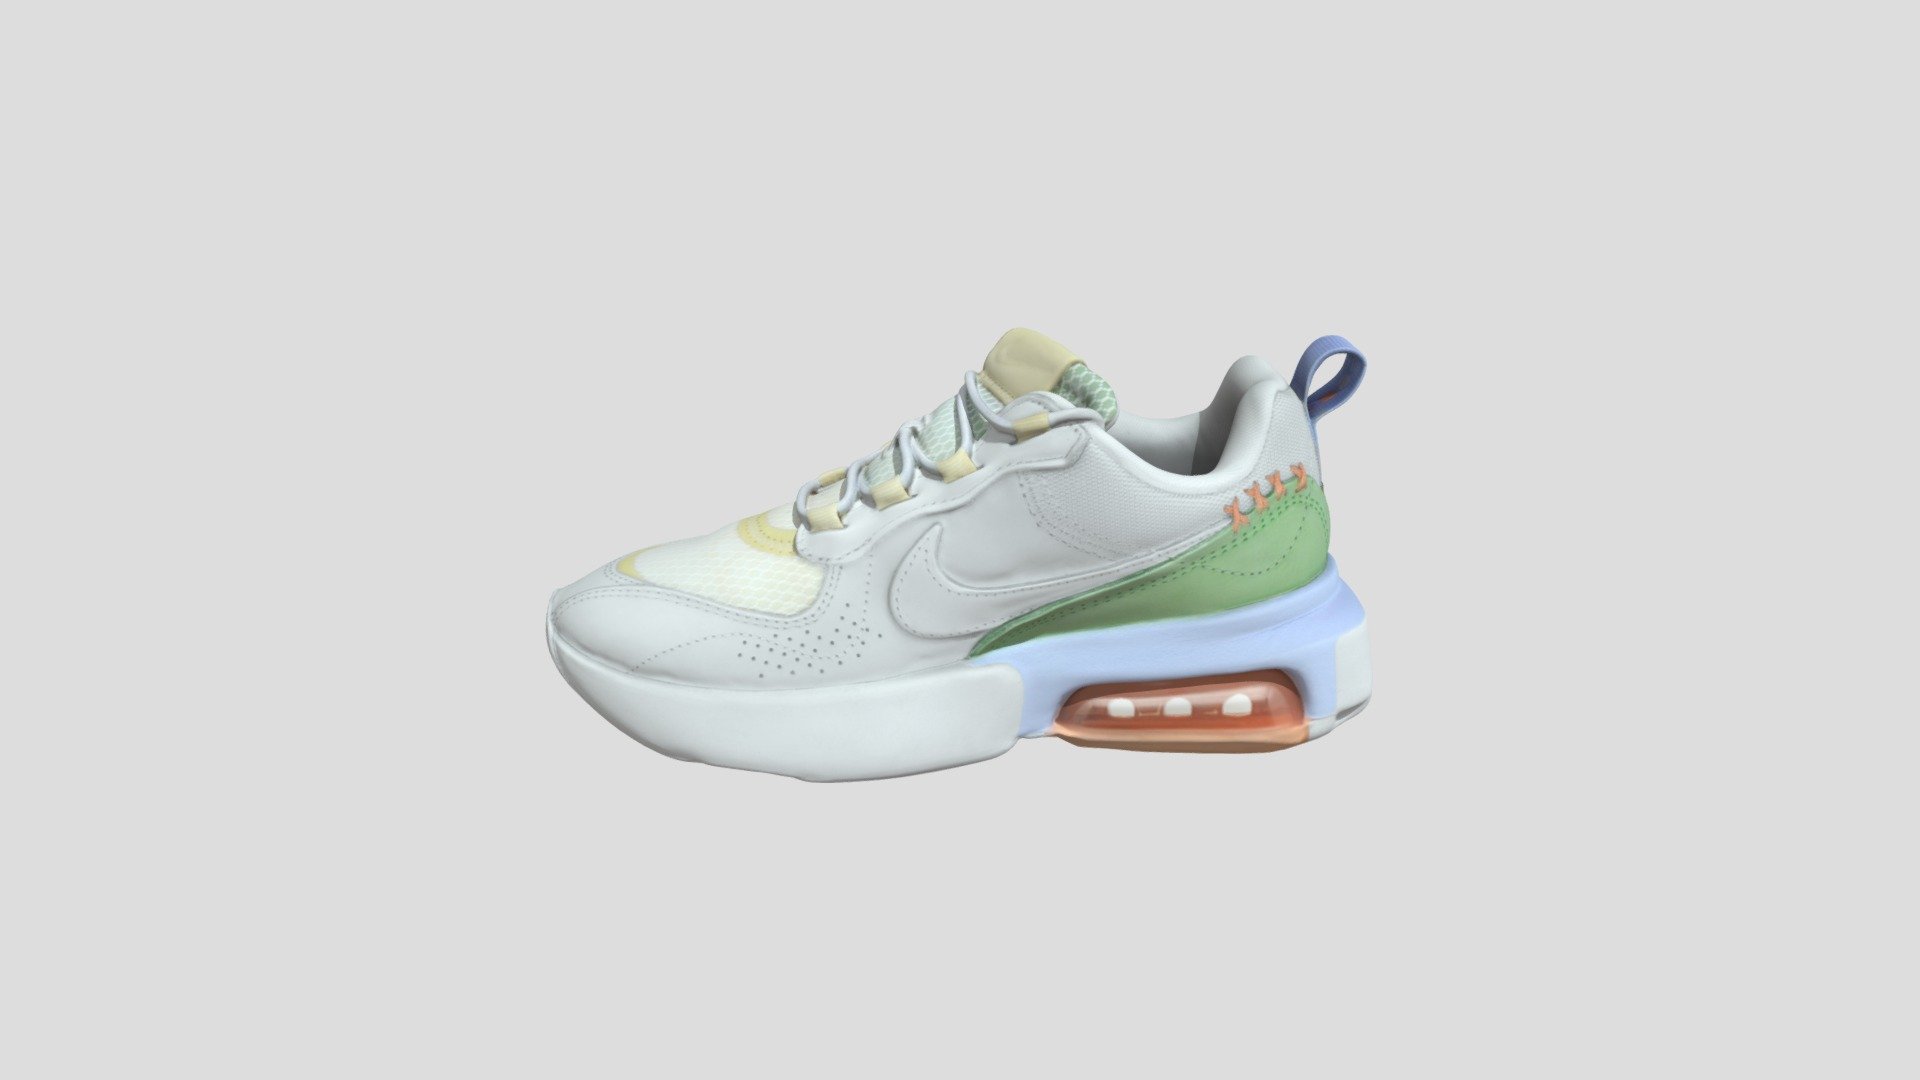 This model was created firstly by 3D scanning on retail version, and then being detail-improved manually, thus a 1:1 repulica of the original
PBR ready
Low-poly
4K texture
Welcome to check out other models we have to offer. And we do accept custom orders as well :) - Nike Air Max Verona 灰绿兰 女款_CZ8683-011 - Buy Royalty Free 3D model by TRARGUS 3d model